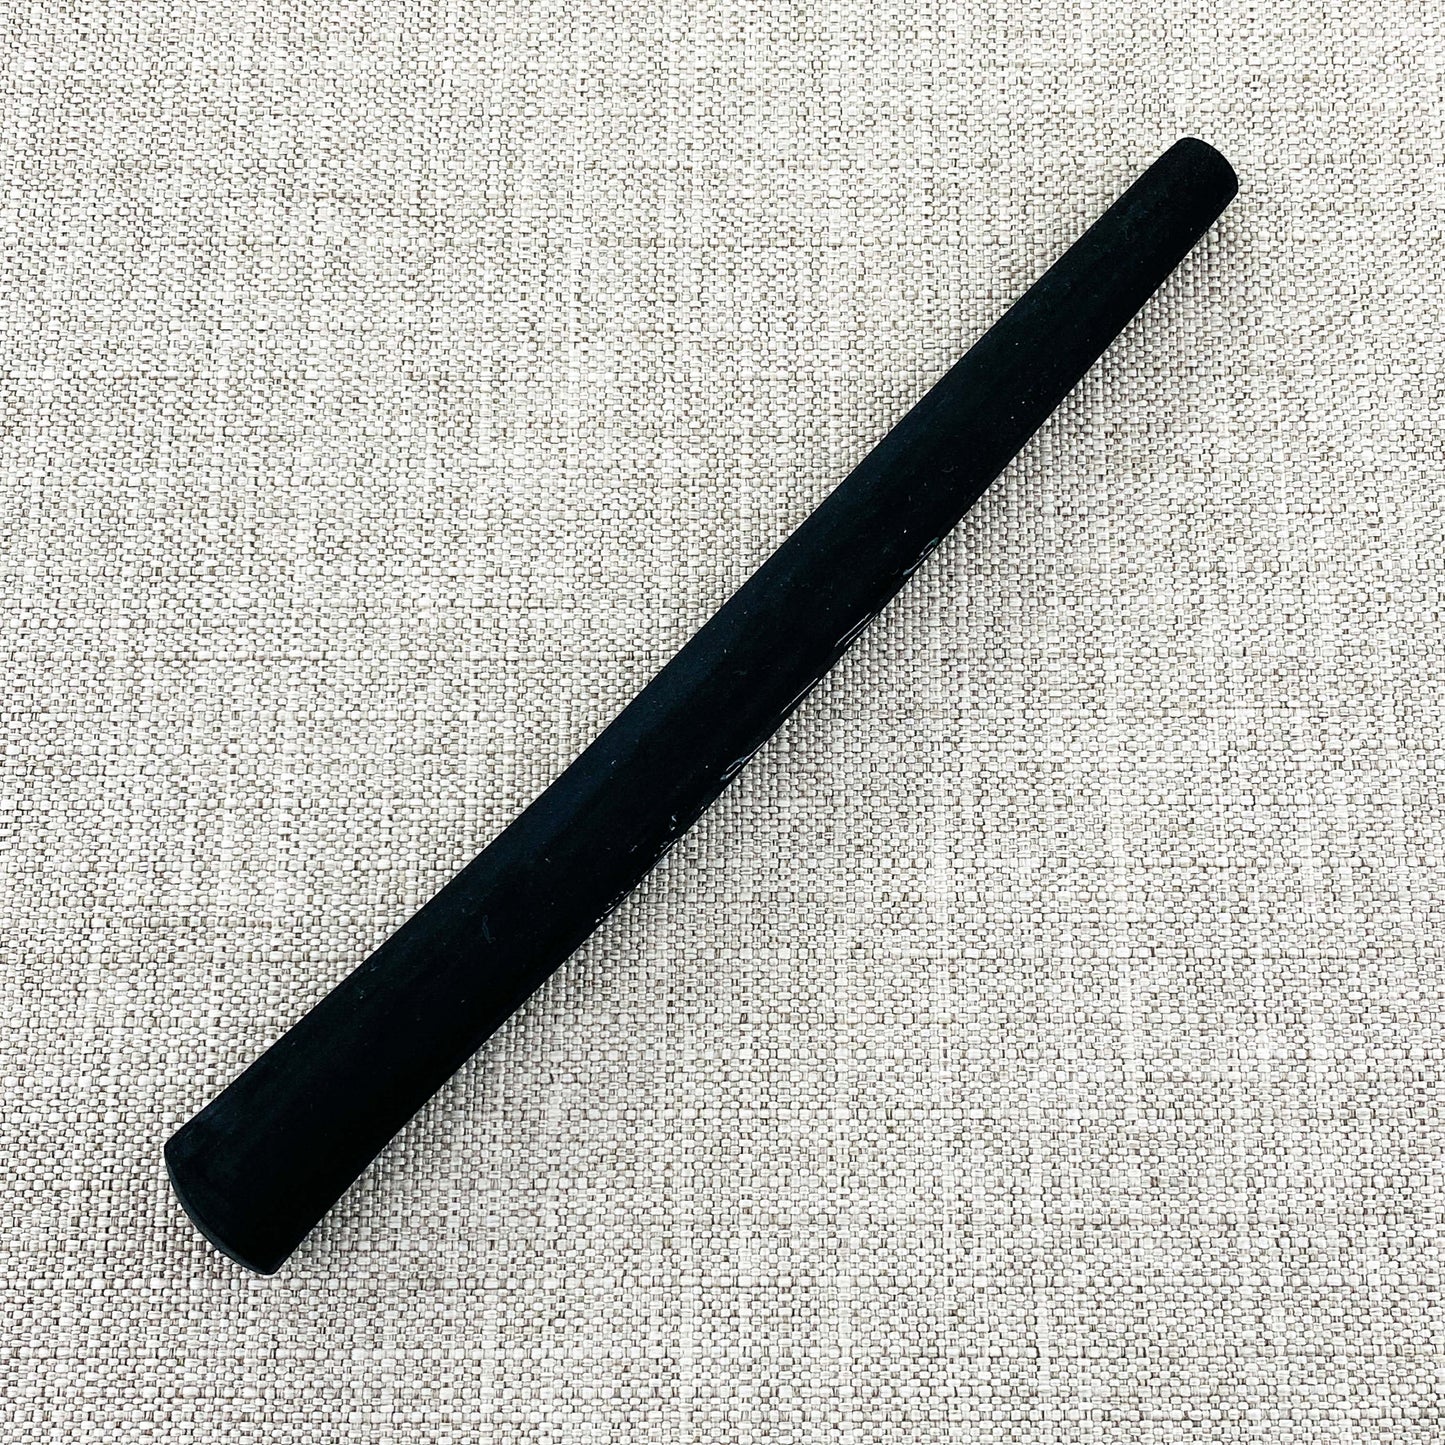 Golf Pride PING PP58 'Blackout' pistol putter grip. Black - Price includes fitment.